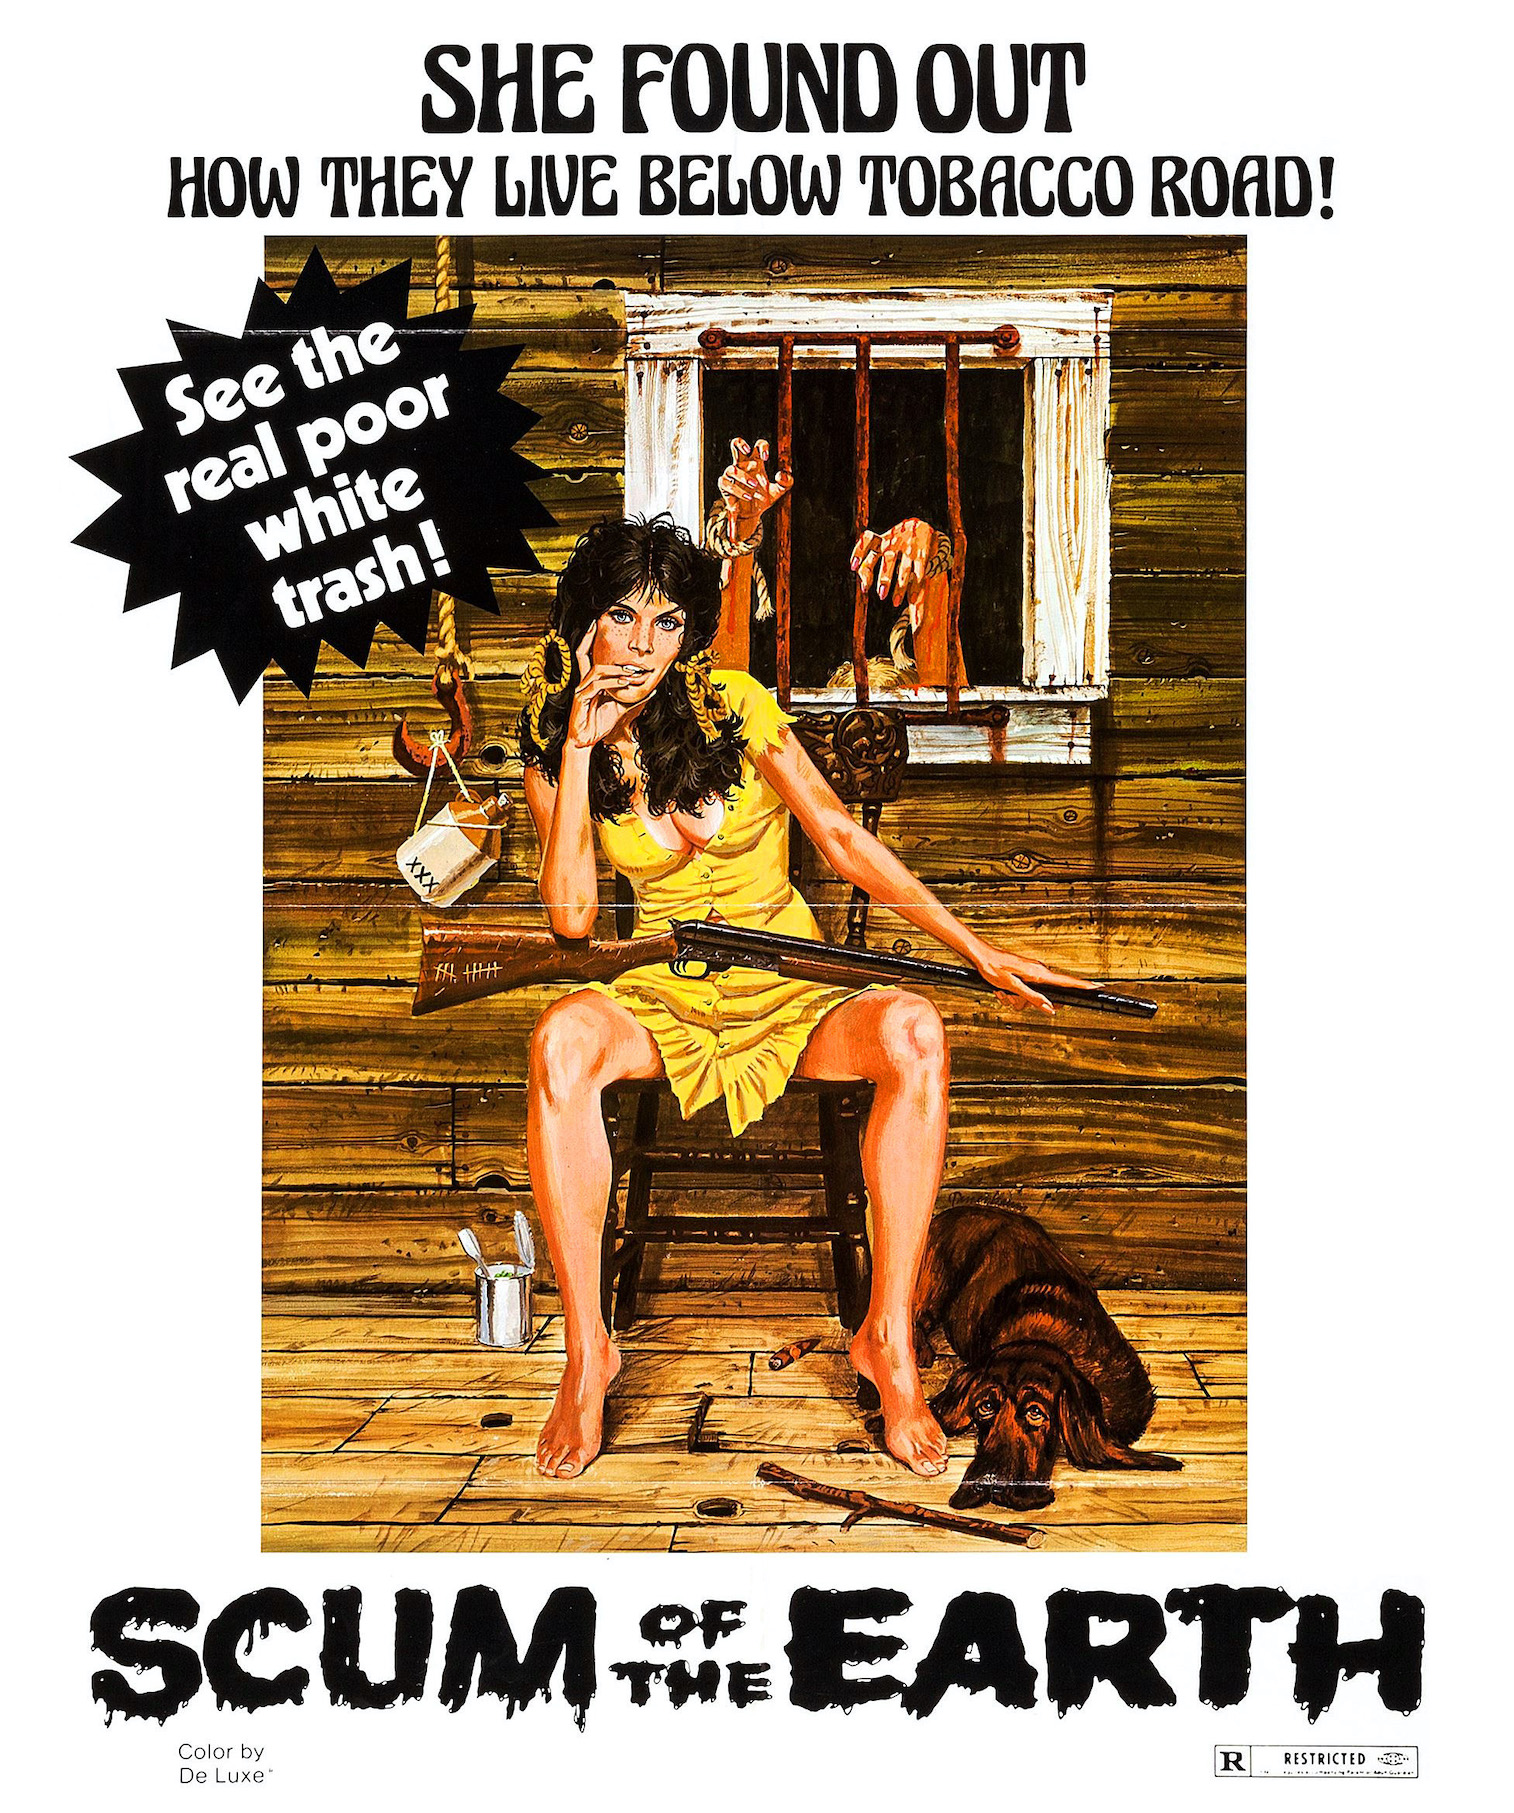 Scum of the Earth / Poor White Trash Part 2 movie poster. Directed by S.F. Brownrigg